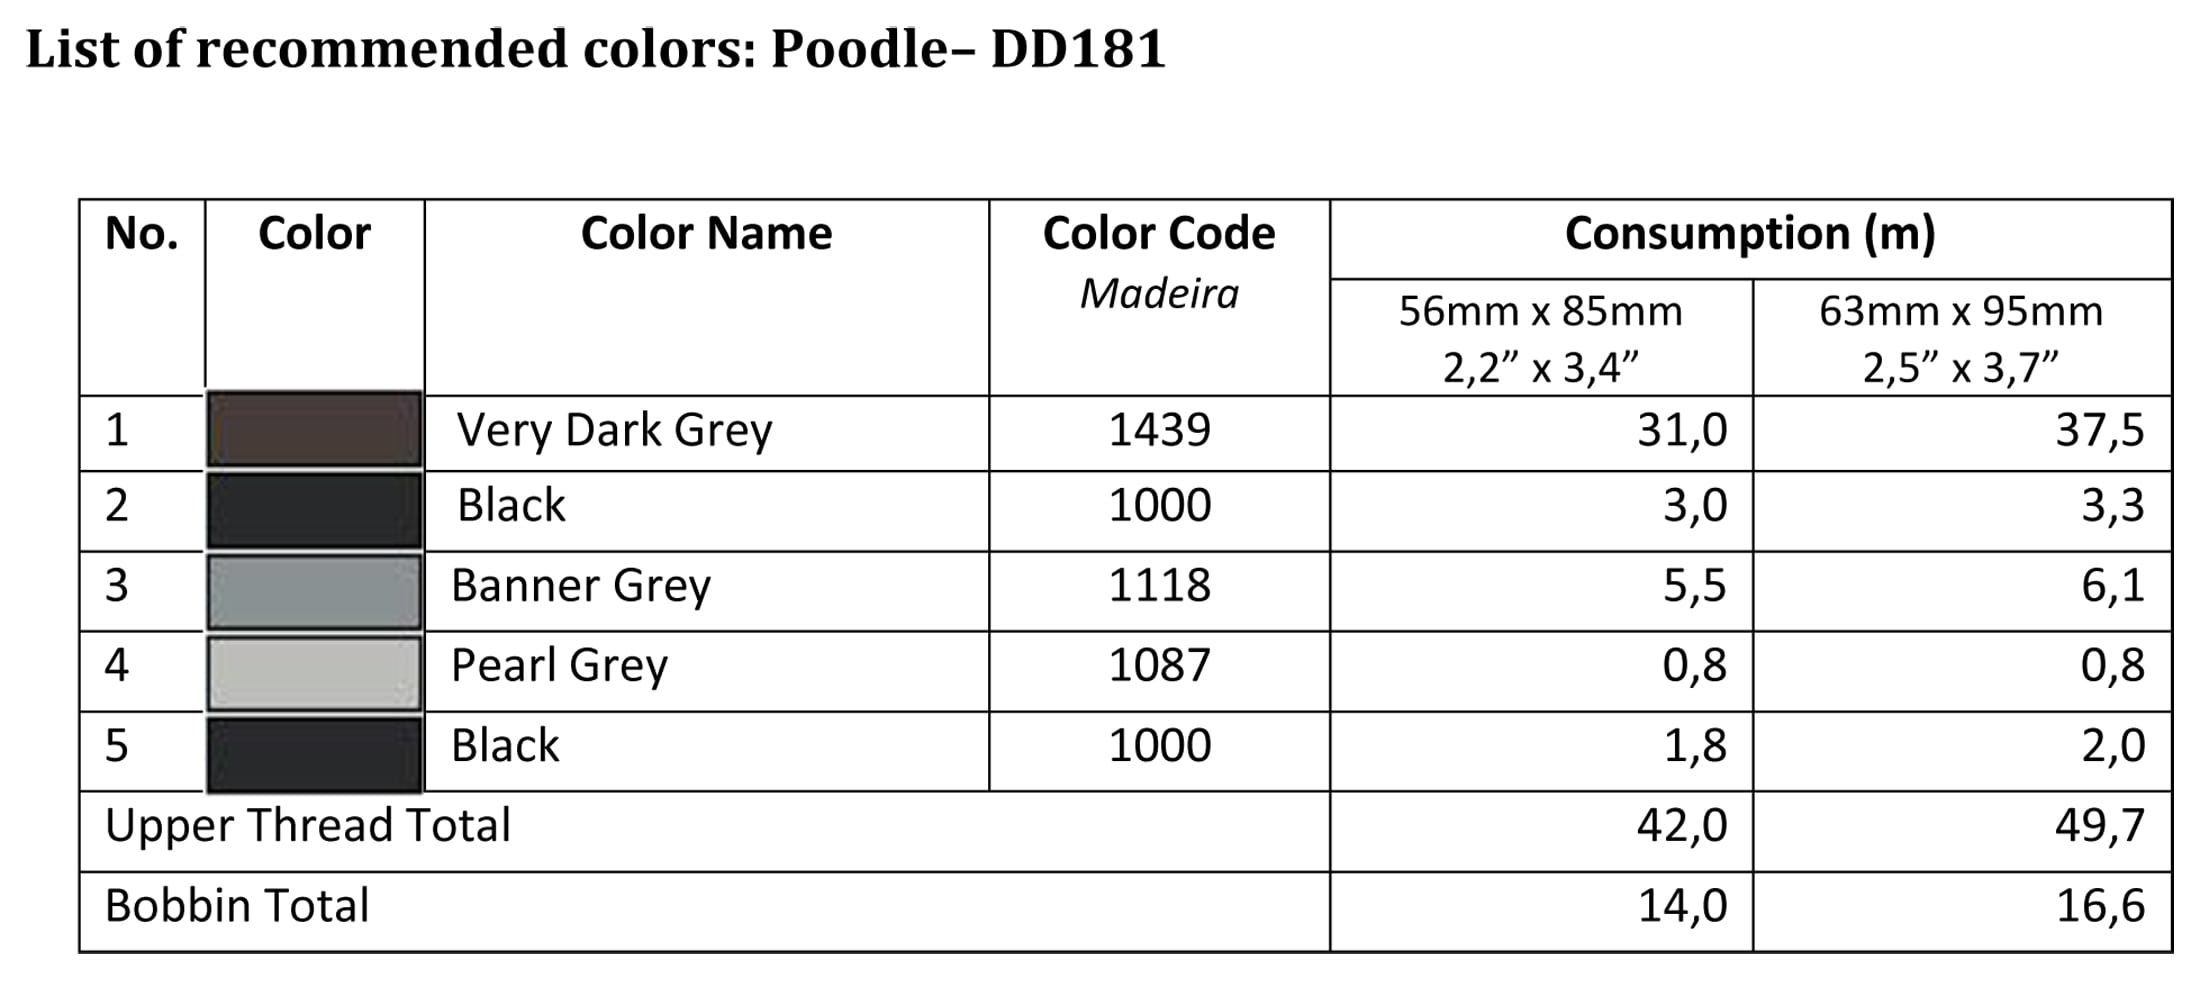 List of recommended colors - DD181